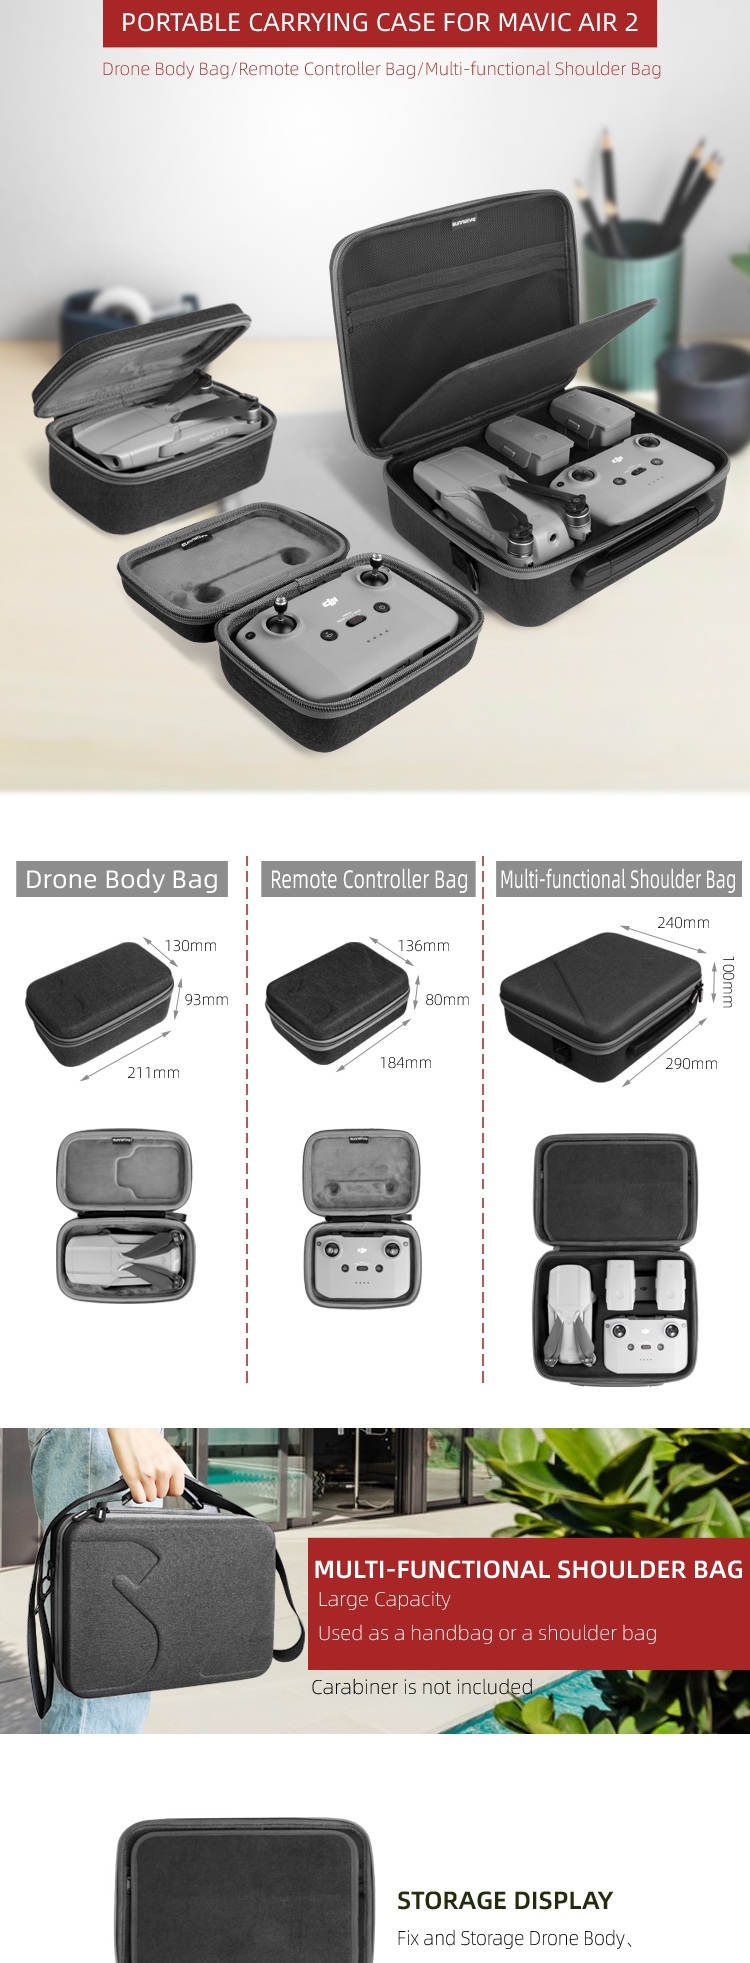 Sunnylife Portable Waterproof Drone Remote Controller Storage Bag Carrying Case Box for DJI Mavic Air 2